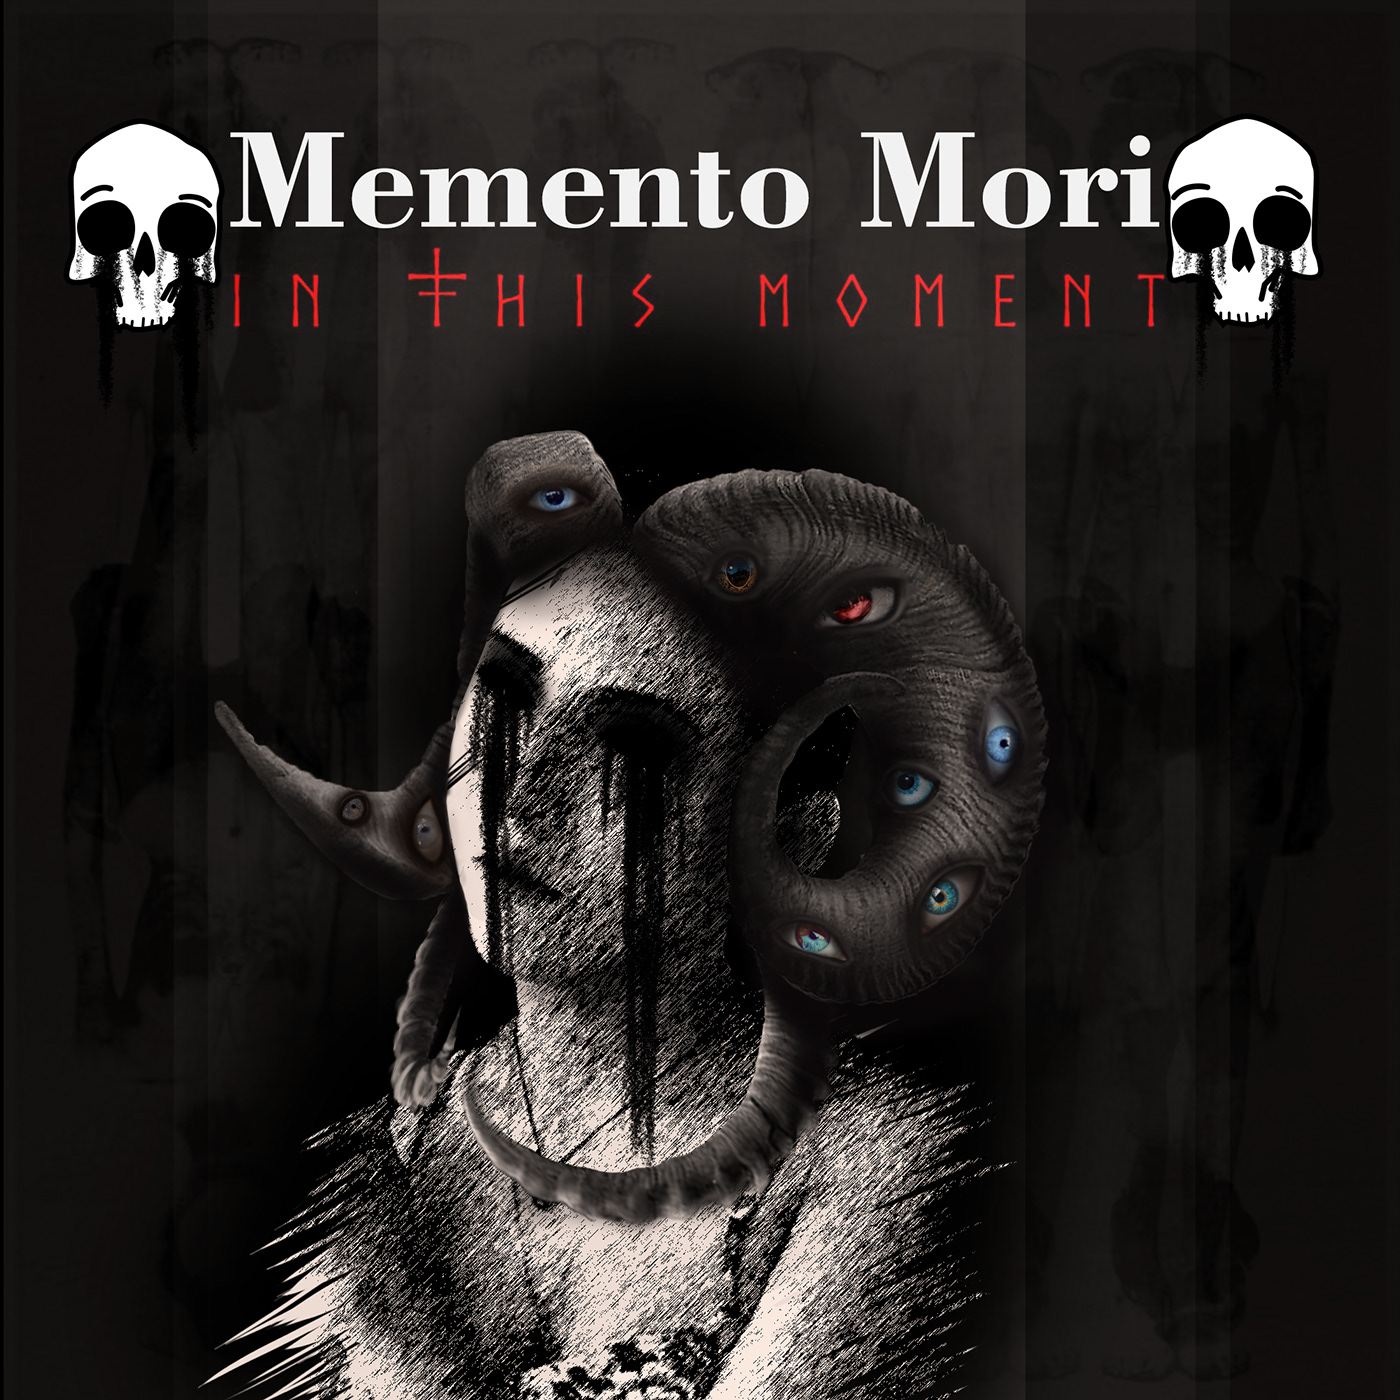 I'll find your soul and take it to Hell. I can see with my eyes. Memento mori